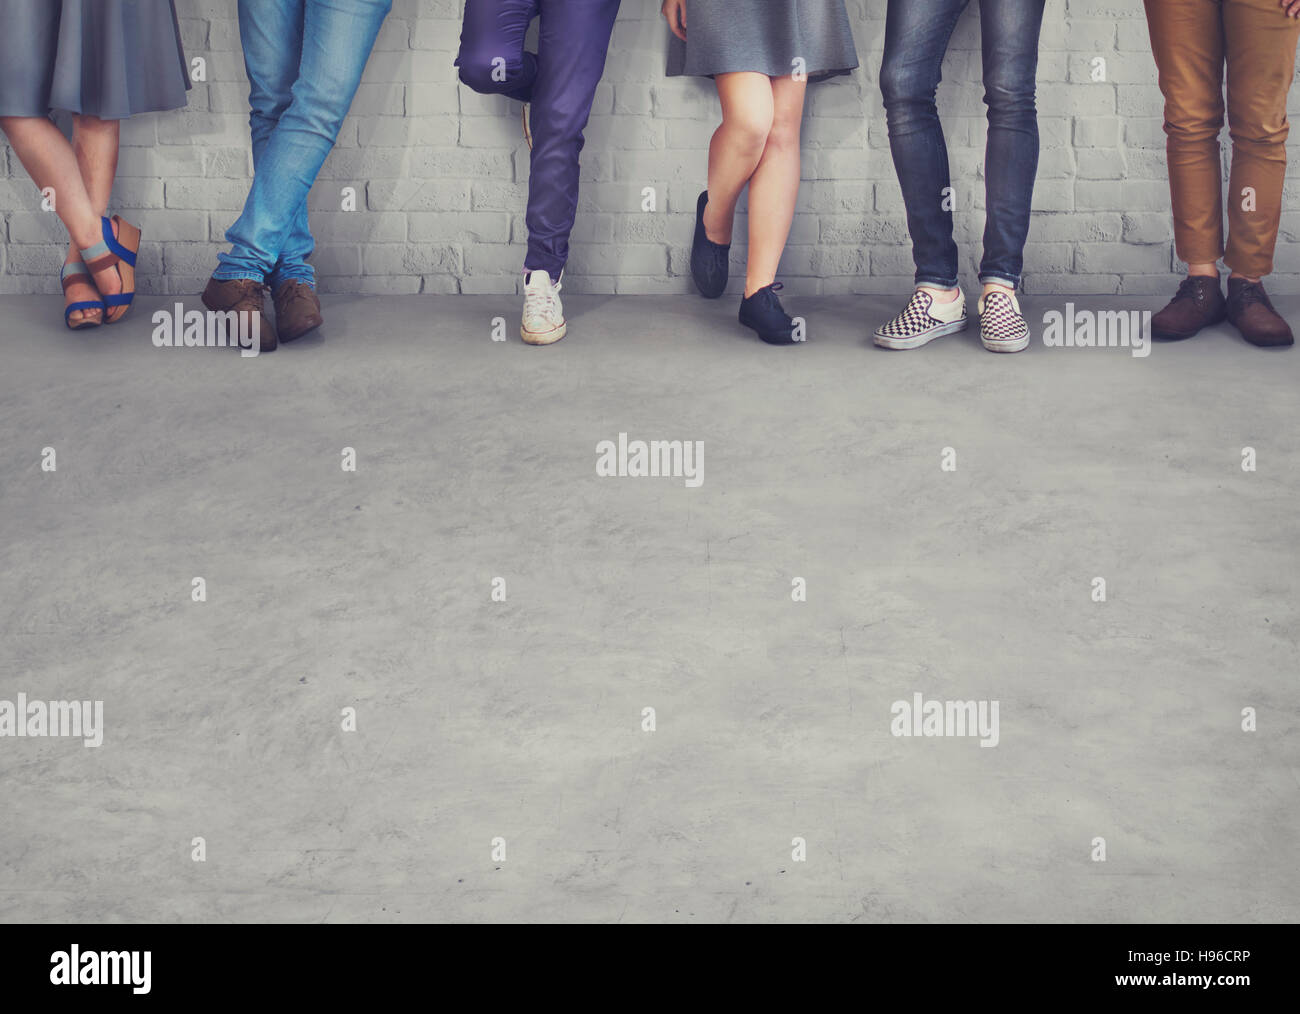 Teens Friends Hipster Fashion Trends Concept Stock Photo